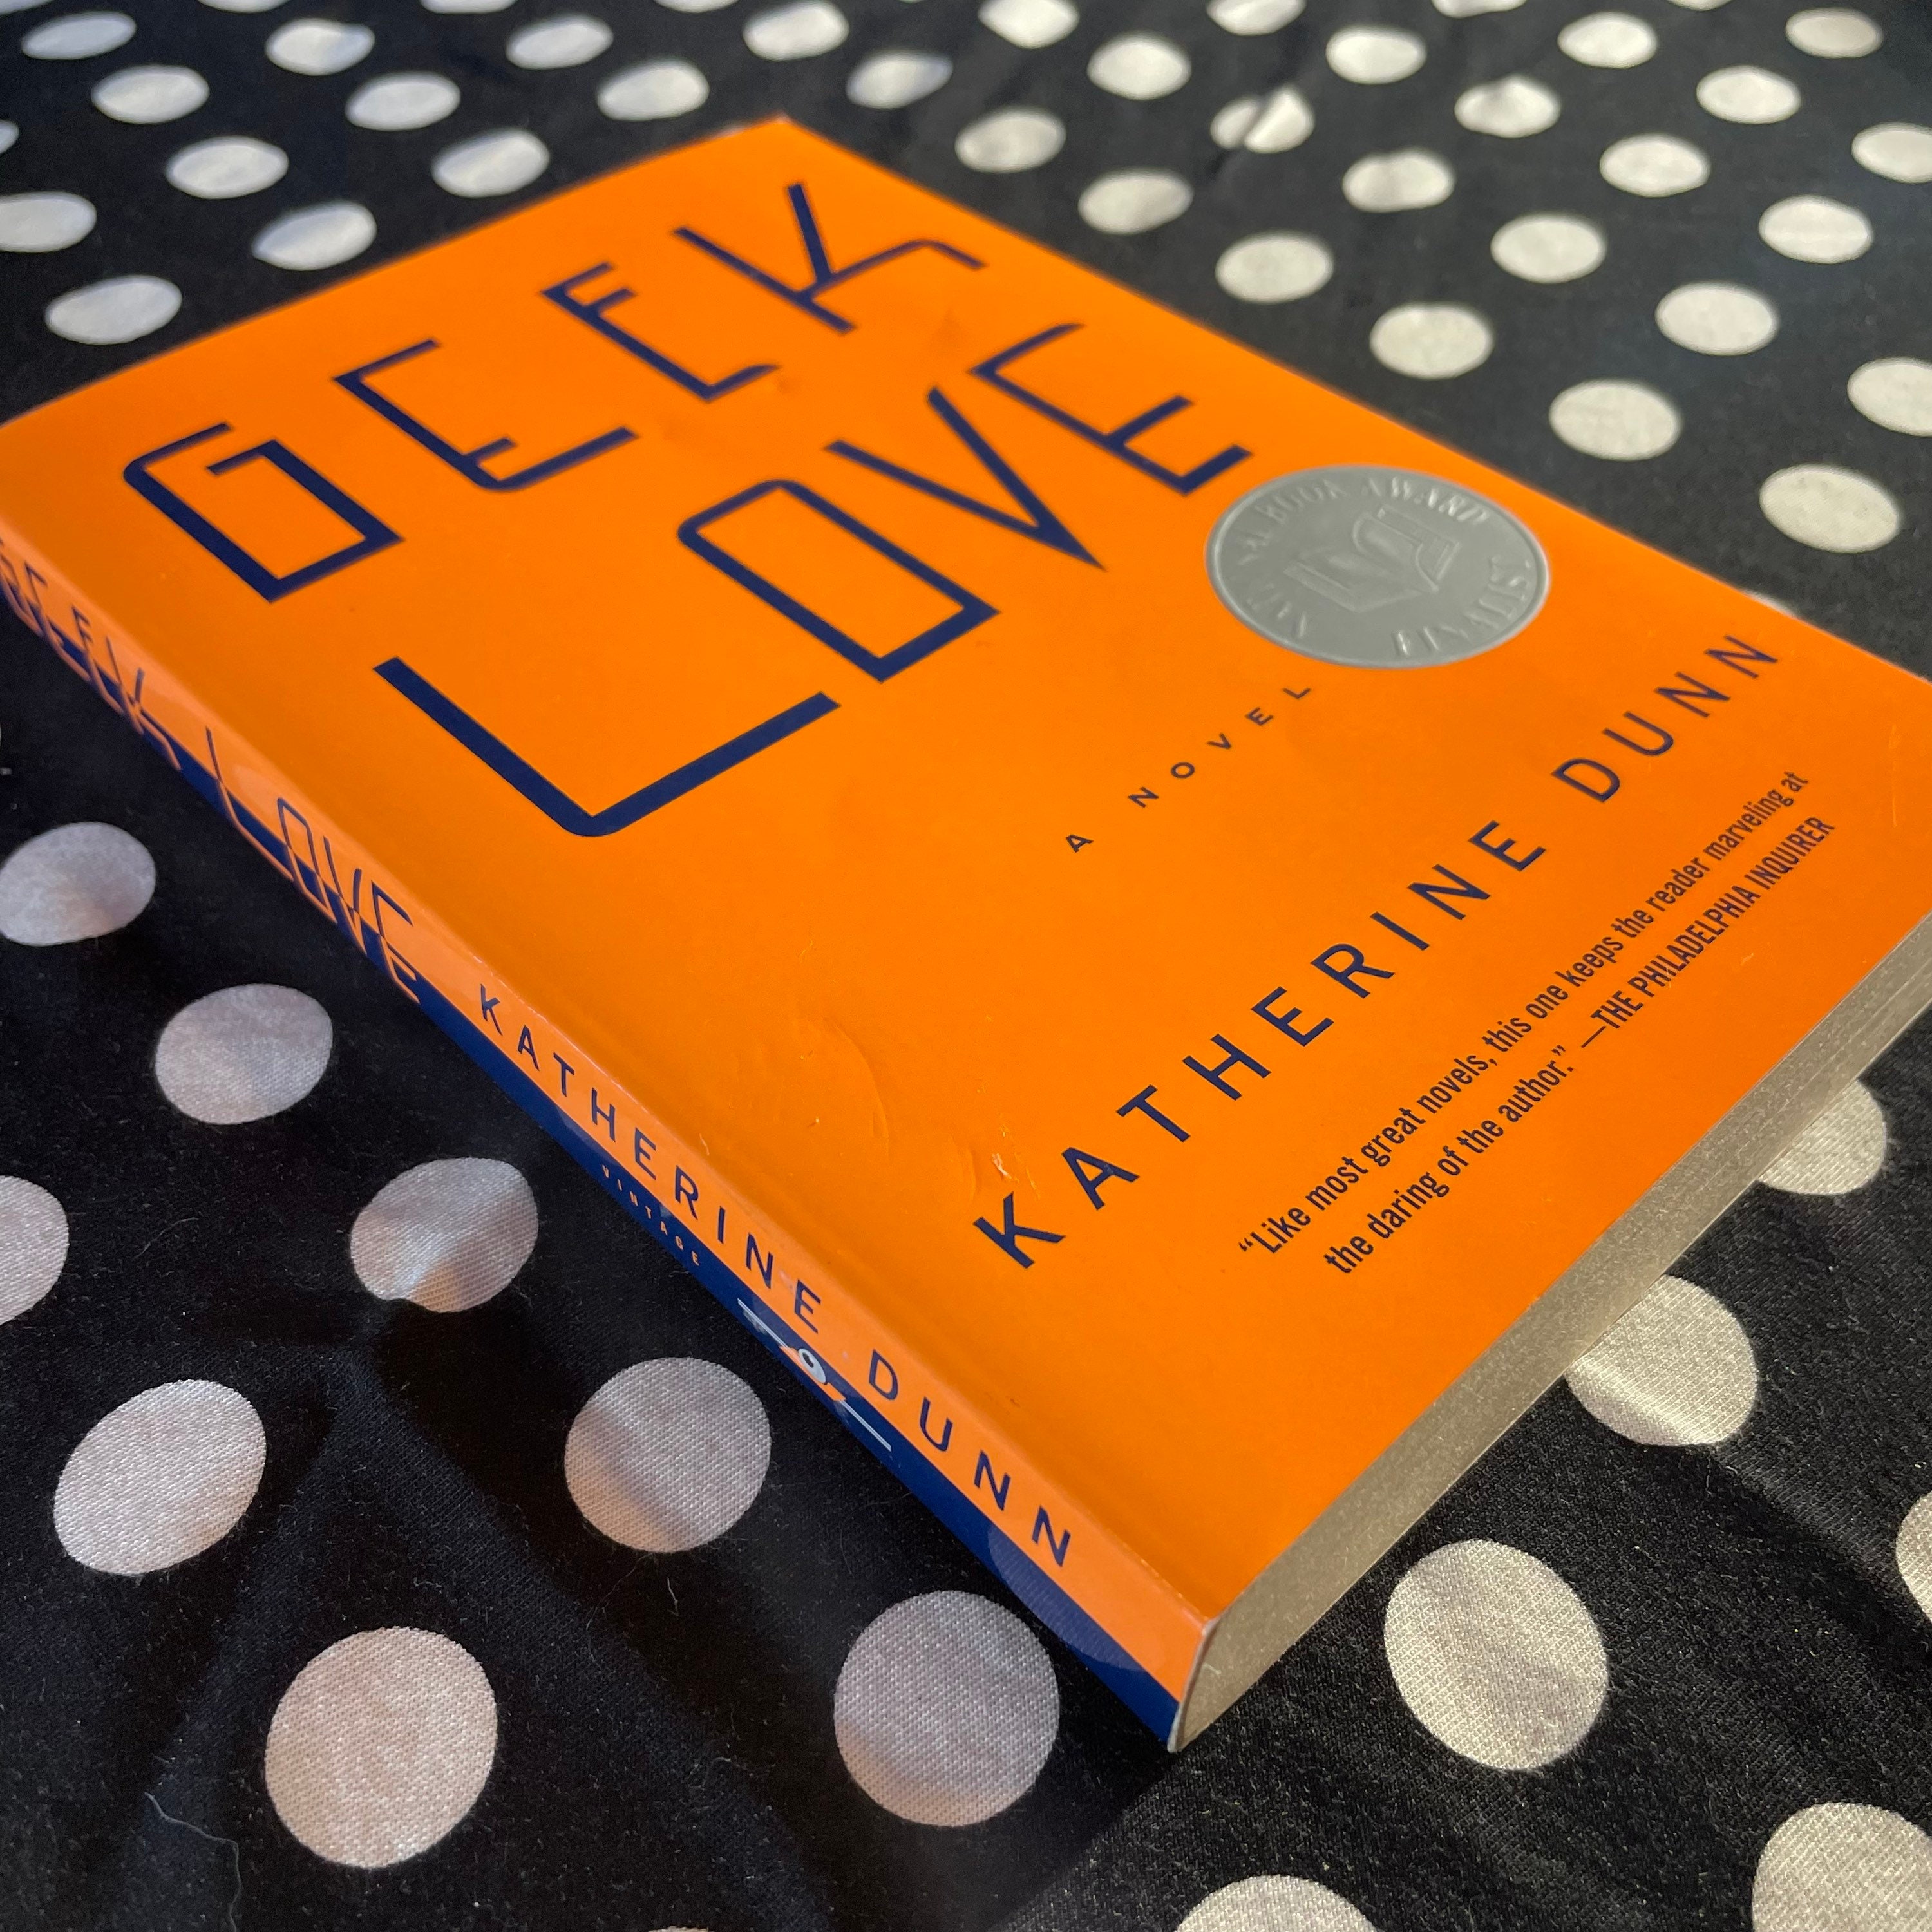 Geek Love By Katherine Dunn 2002 Softcover Edition Etsy